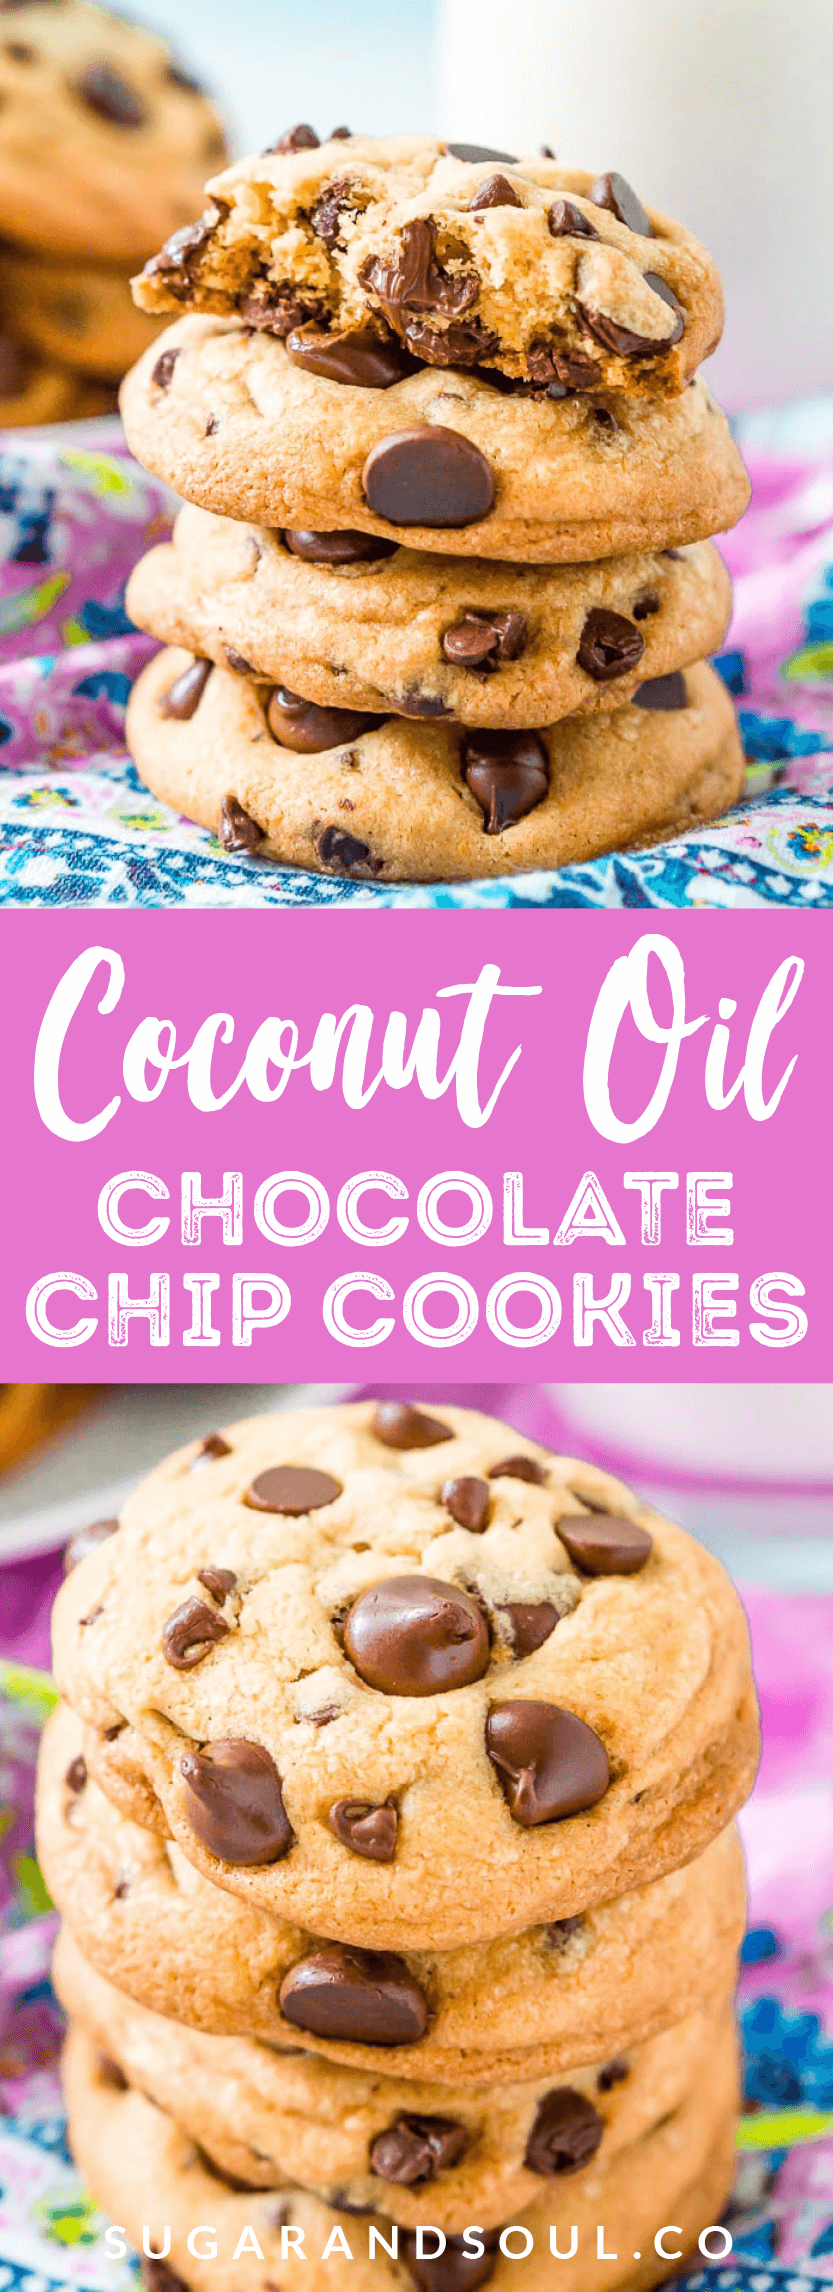 Looking for delicious Chocolate Chip Cookies that are dairy-free? You'll love these Coconut Oil Chocolate Chip Cookies are everything you love about the classic cookie but they're made with coconut oil instead of butter - and still absolutely delicious! via @sugarandsoulco